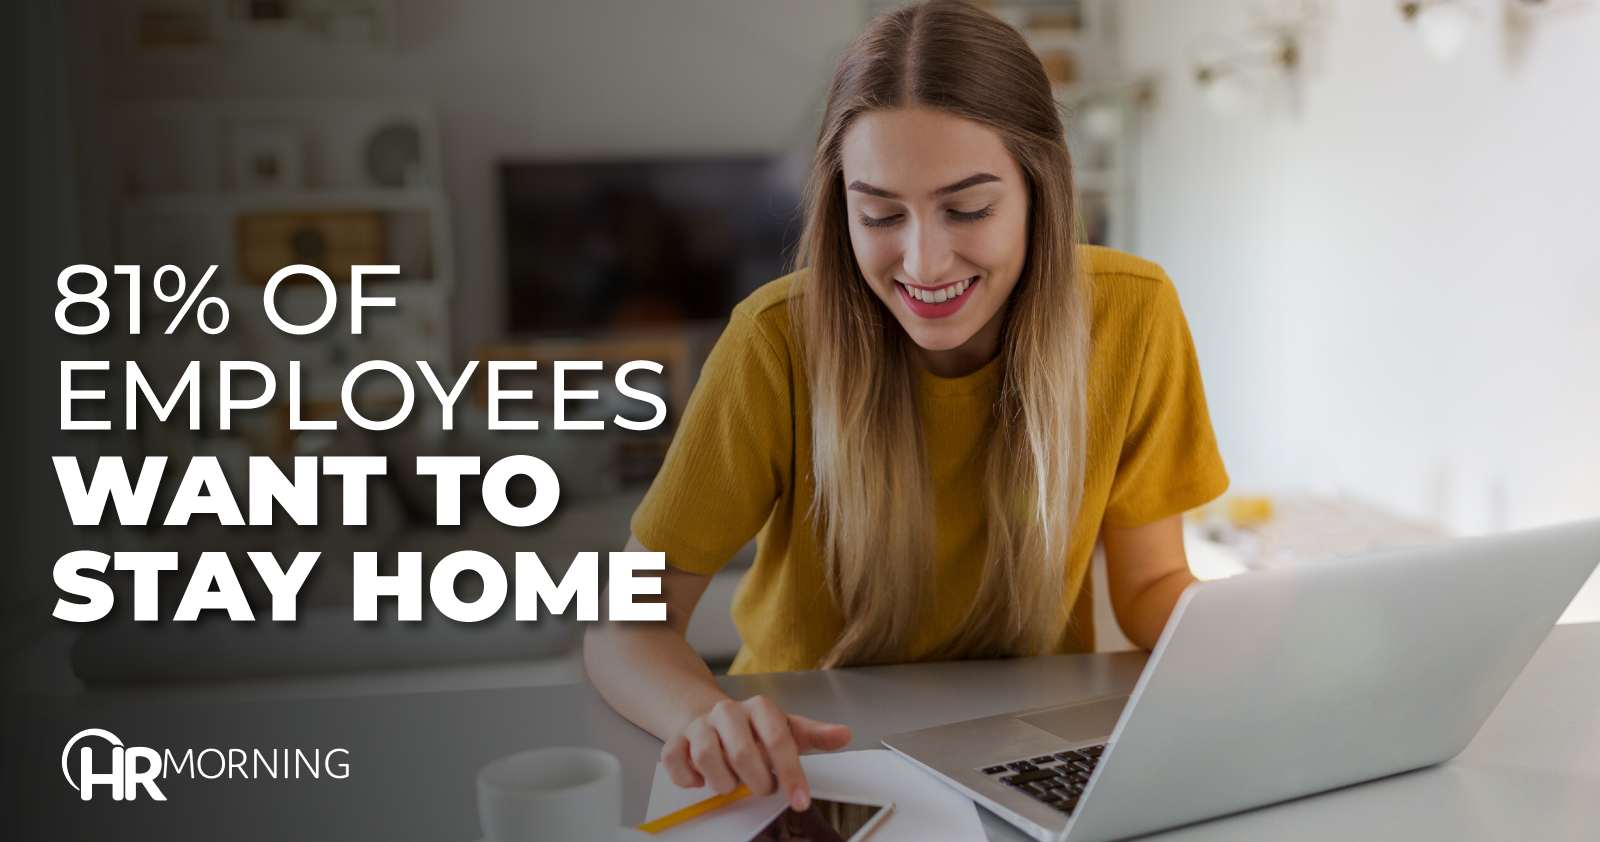 81% Of Employees Want To Stay Home